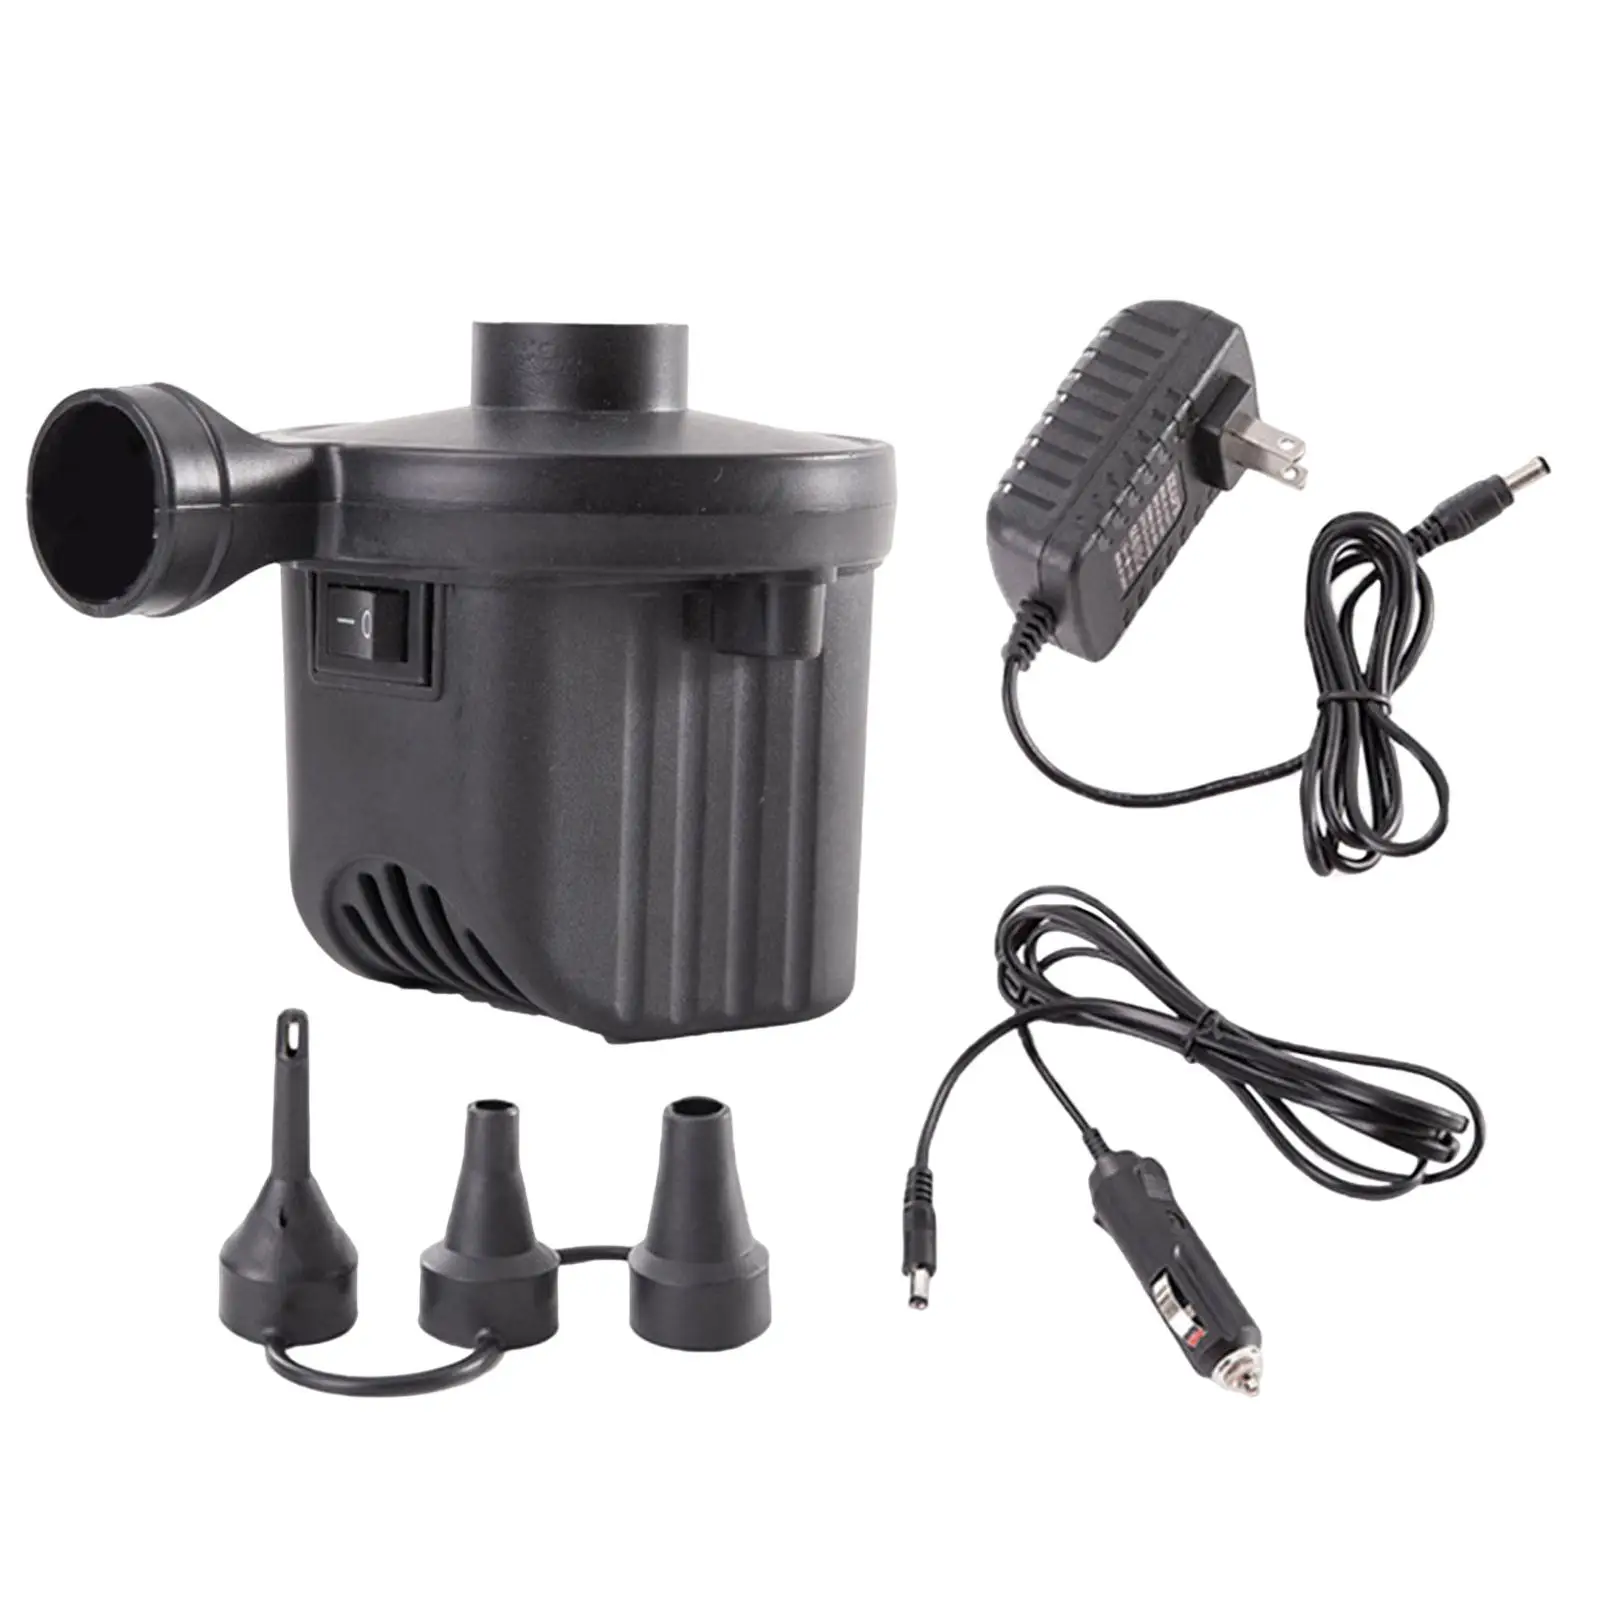 Electric Air Pump Inflator Deflator Deflatable Inflatable Pump for Home Cars Paddle Board